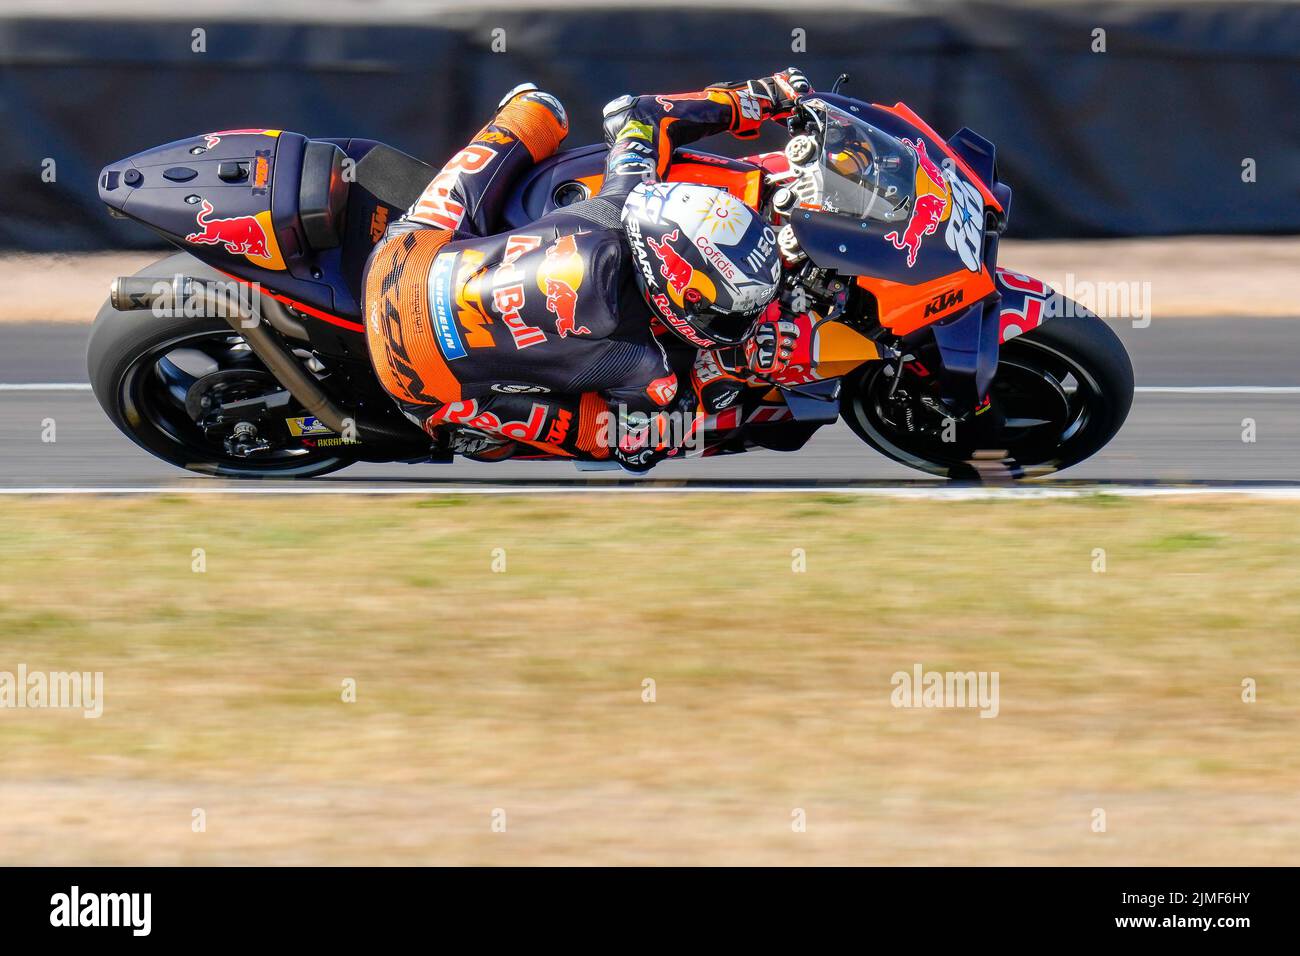 Towcester, UK. 06th Aug, 2022. Miguel OLIVEIRA (Portugal) of the Red Bull KTM Factory Racing Team during the 2022 Monster Energy Grand Prix MotoGP Free Practice 3 session at Silverstone Circuit, Towcester, England on the 6th August 2022. Photo by David Horn. Credit: PRiME Media Images/Alamy Live News Stock Photo